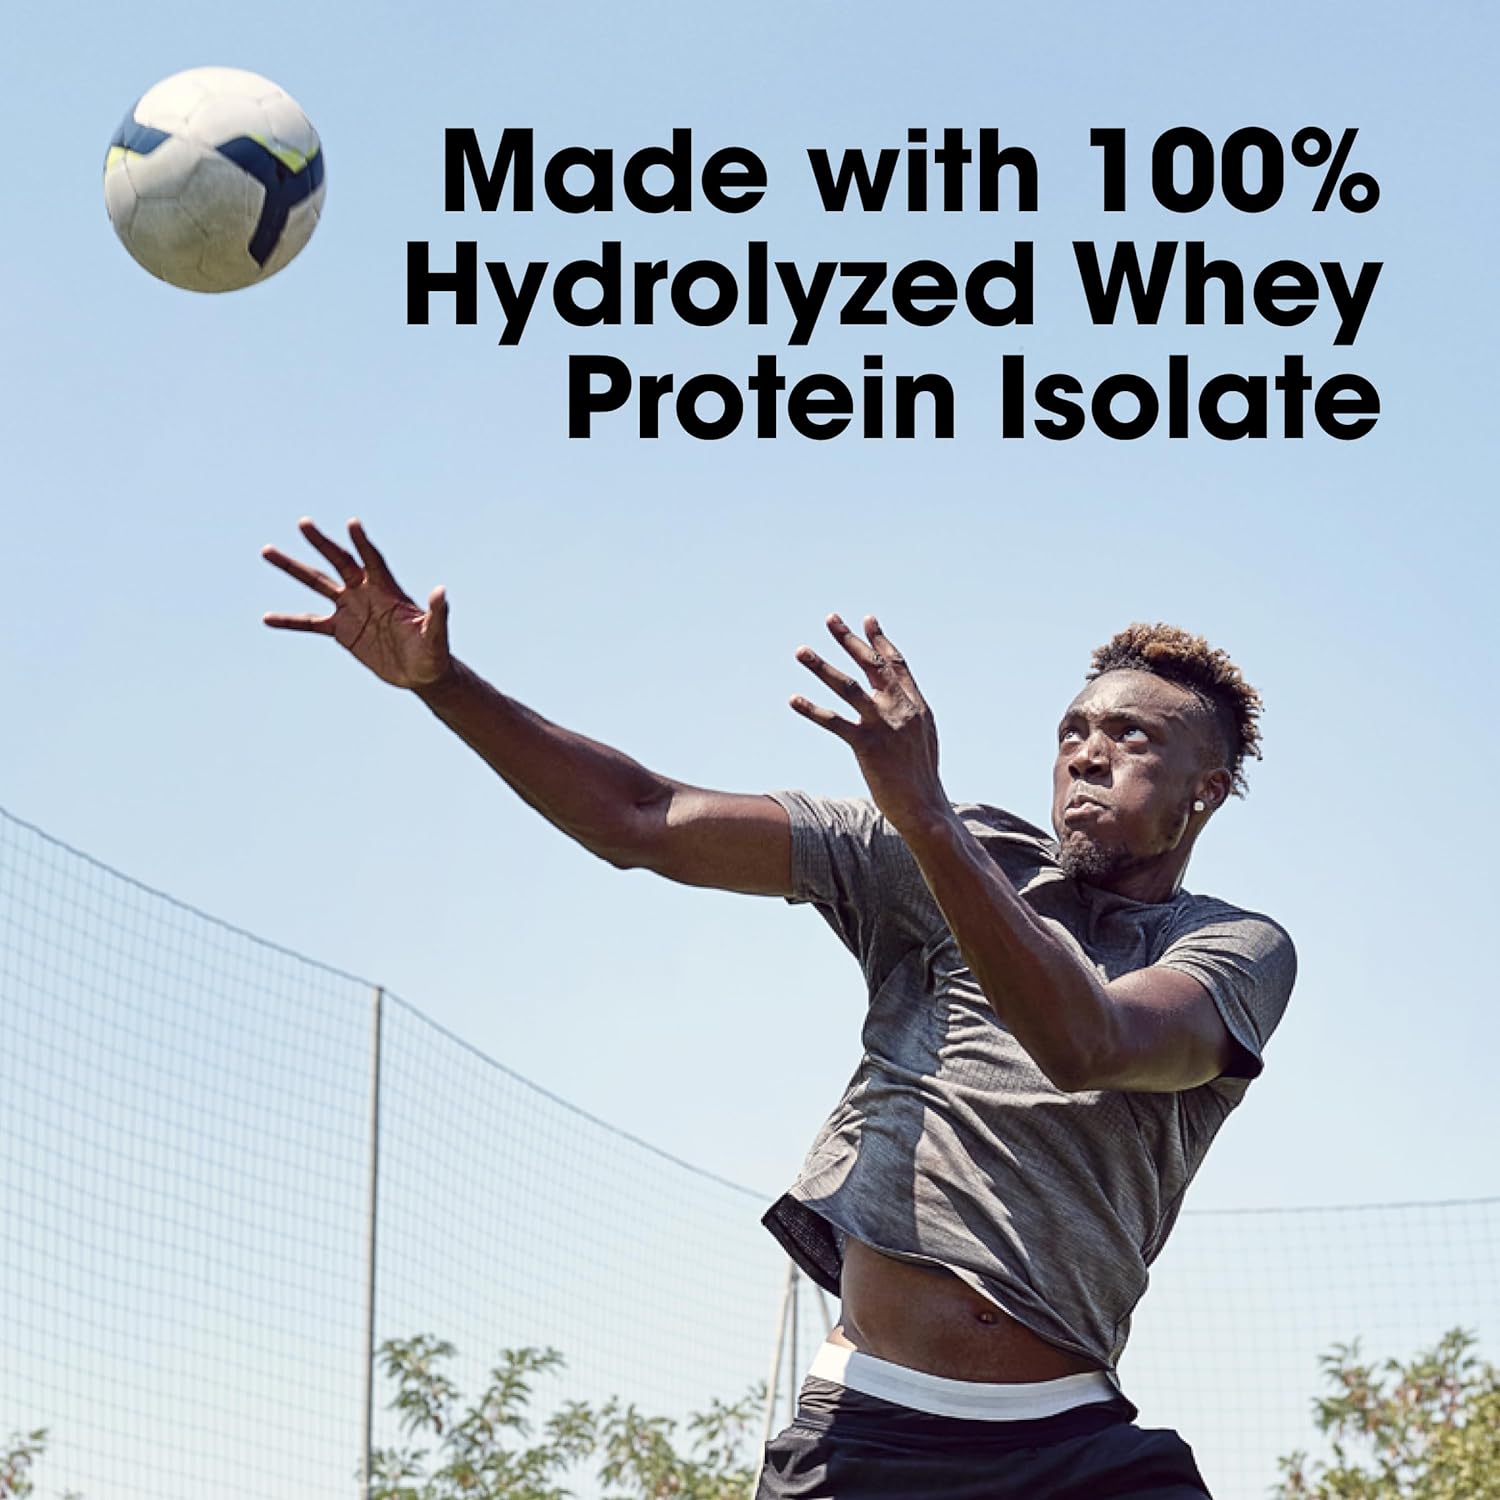 Optimum Nutrition Platinum Hydrowhey Protein Powder, 100% Hydrolyzed Whey Protein Isolate Powder, Flavor: Turbo Chocolate, 40 Servings, 3.61 Pounds (Packaging May Vary) : Health & Household